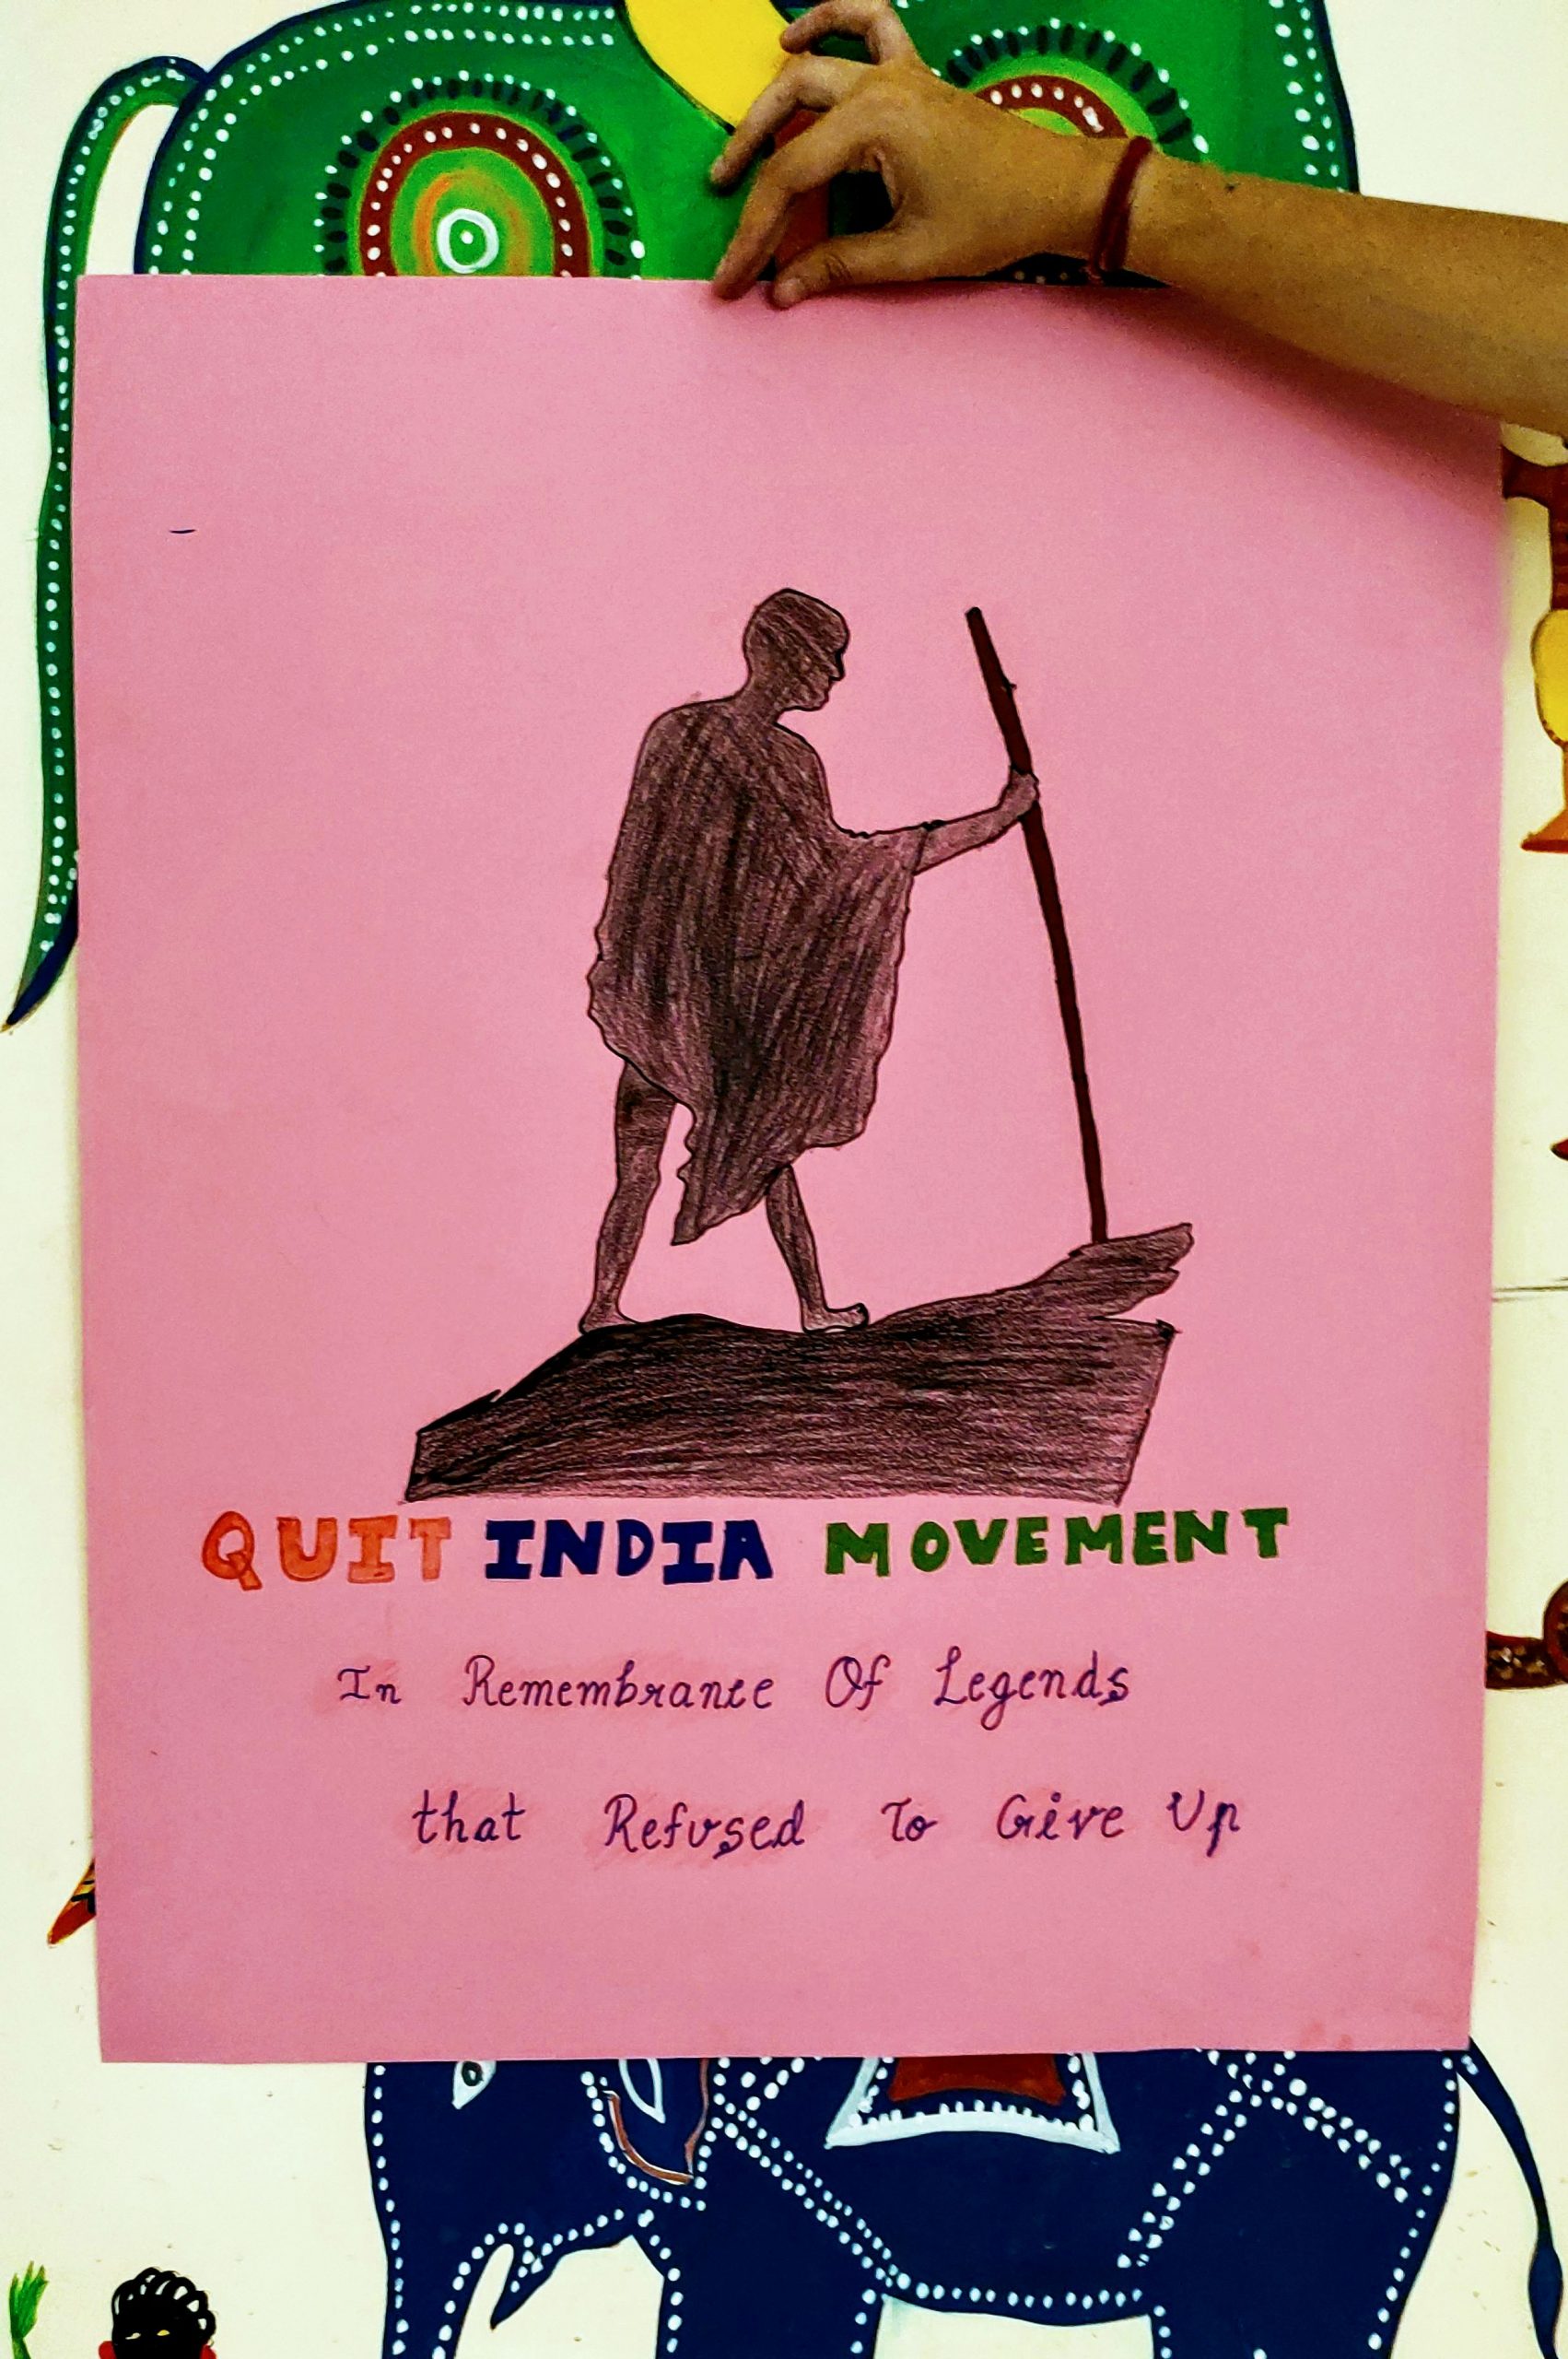 PRESIDIANS COMMEMORATE THE QUIT INDIA MOVEMENT WITH ENTHUSIASM!